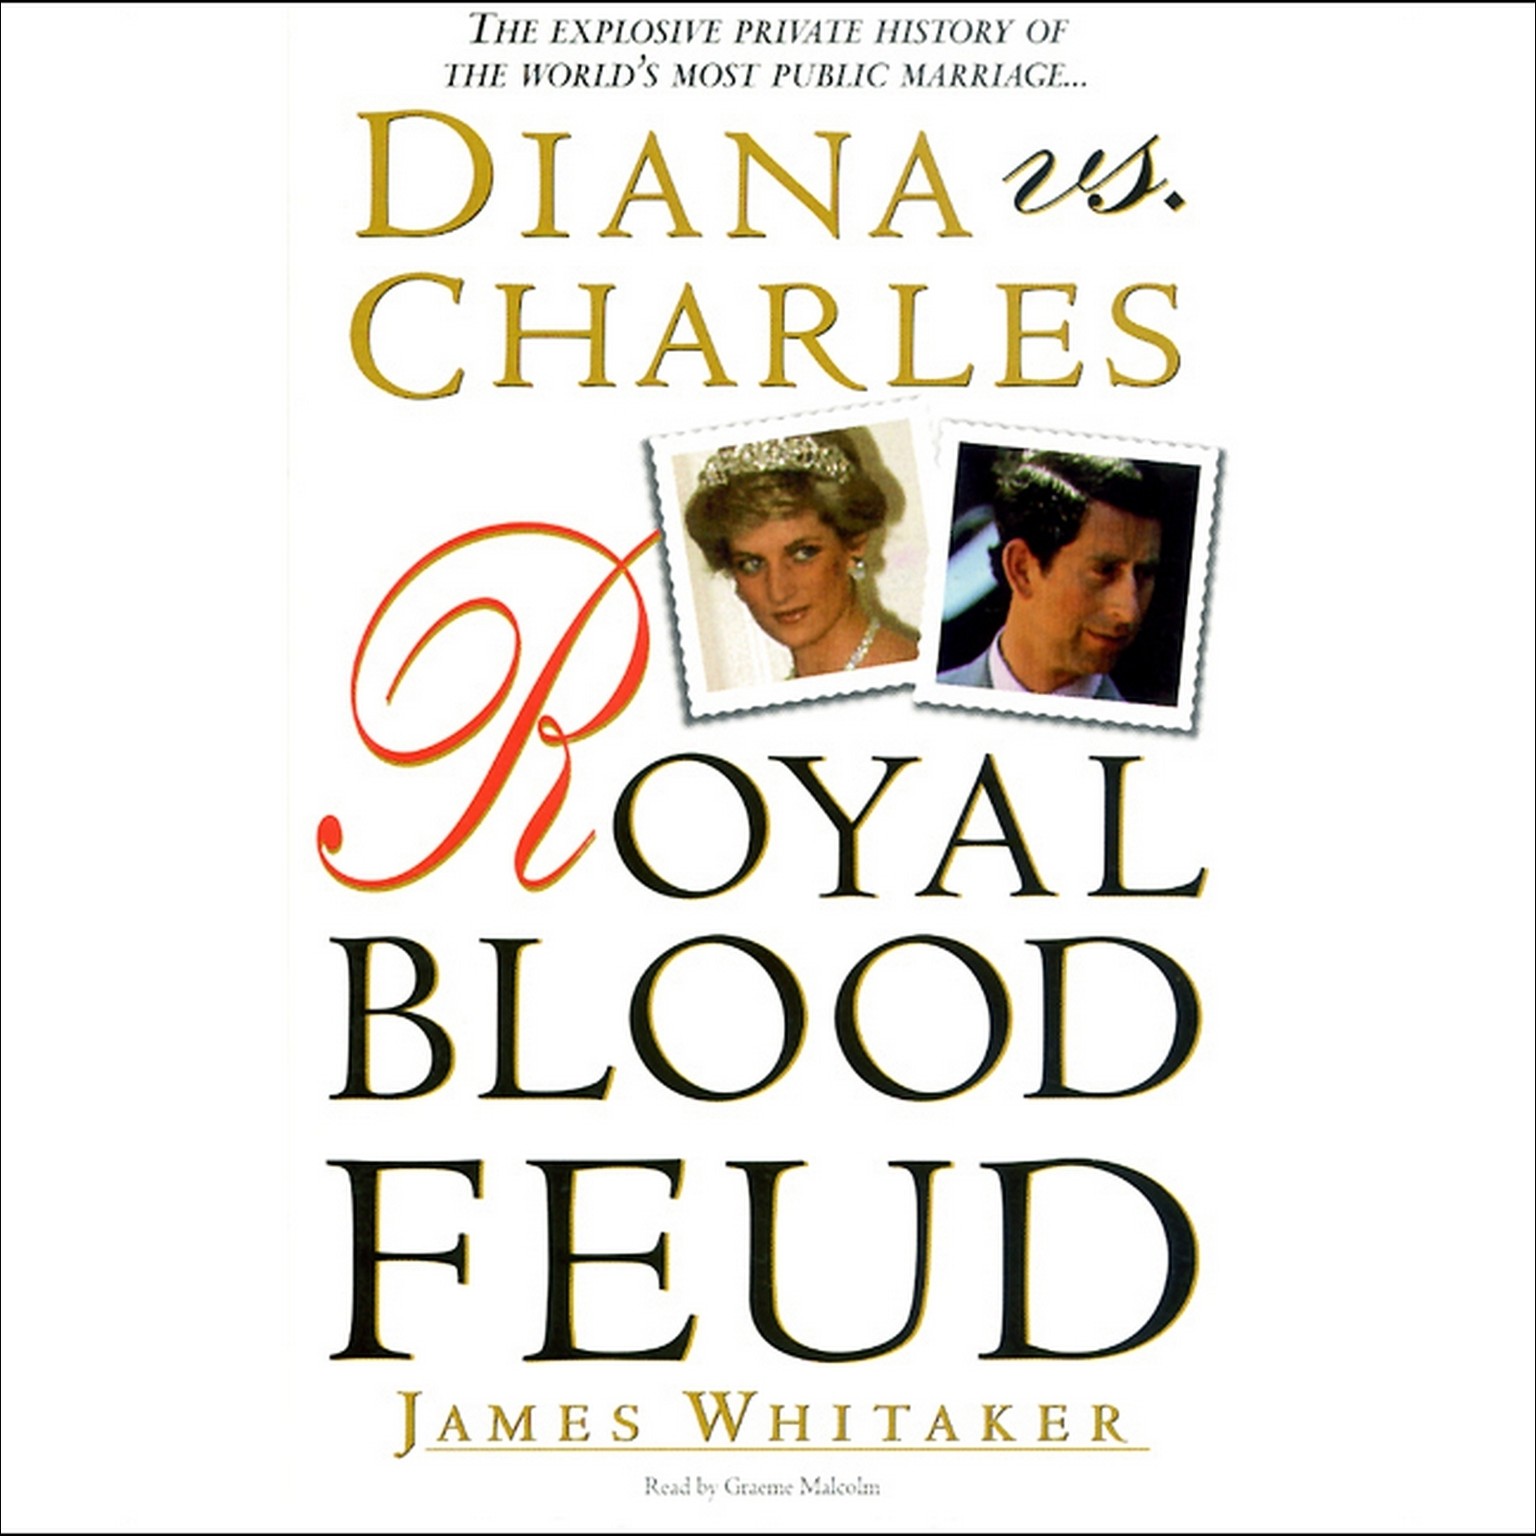 Diana vs. Charles (Abridged): Royal Blood Feud Audiobook, by James Whitaker